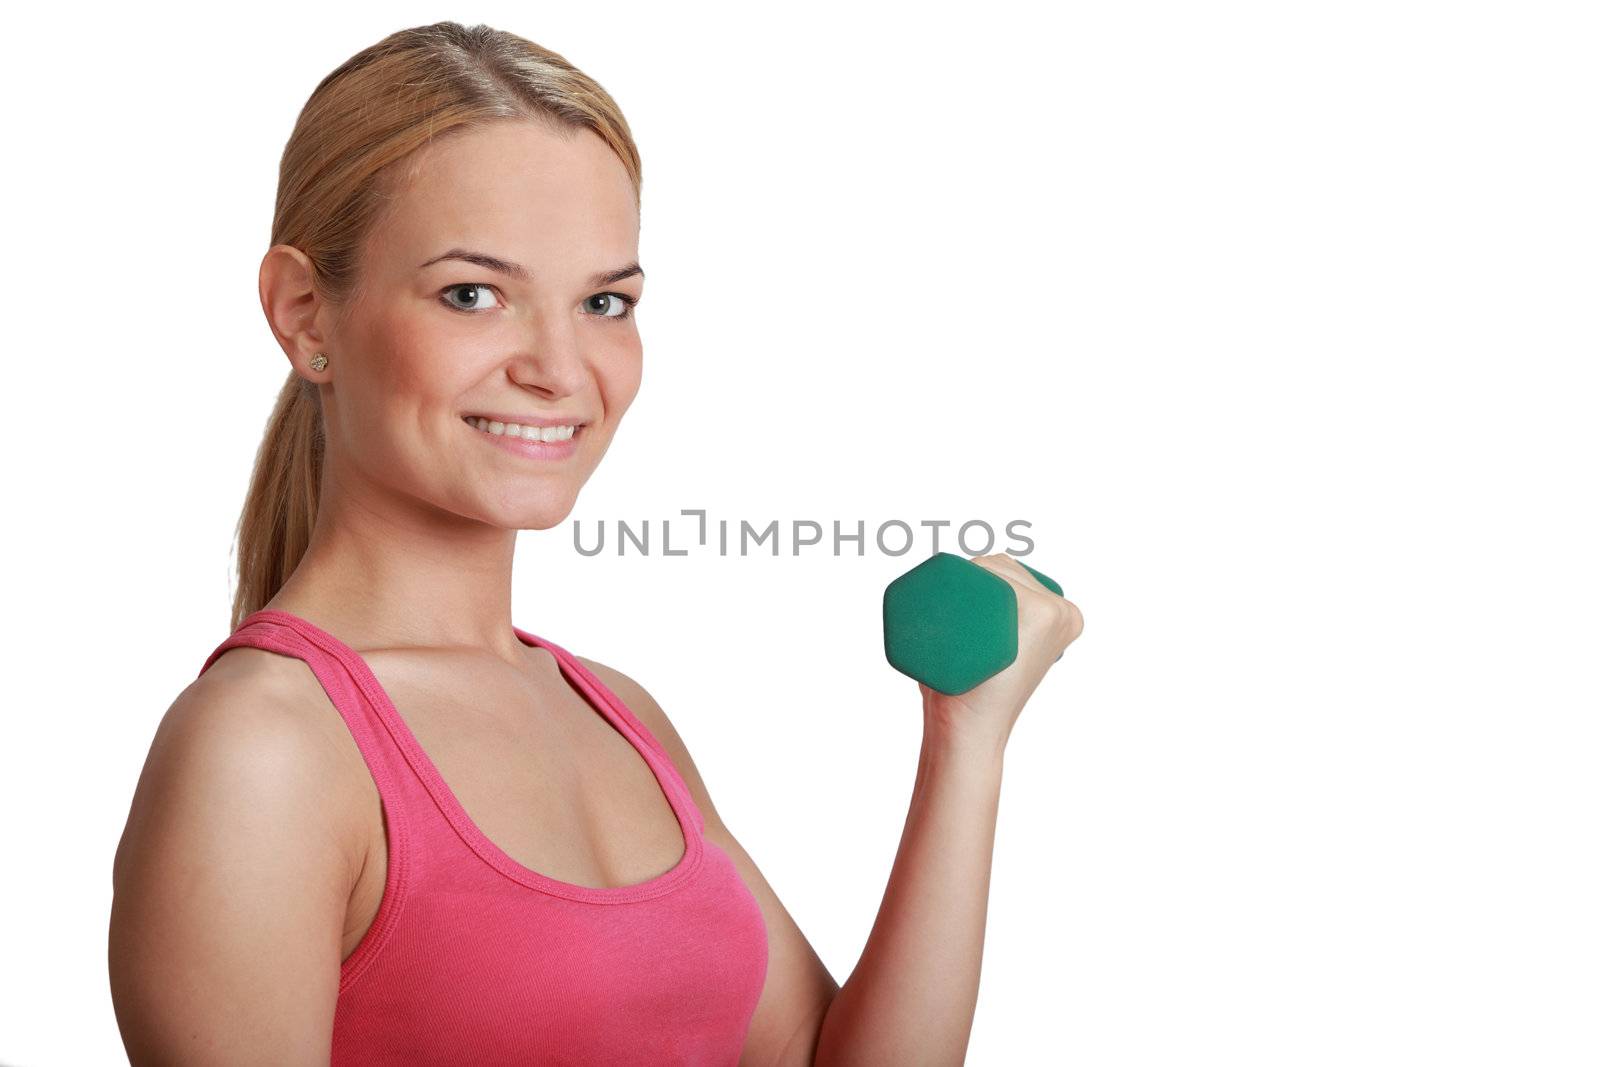 Portrait of a beautiful young blonde girl smiling and holding a green dumbbell isolated against a white background.